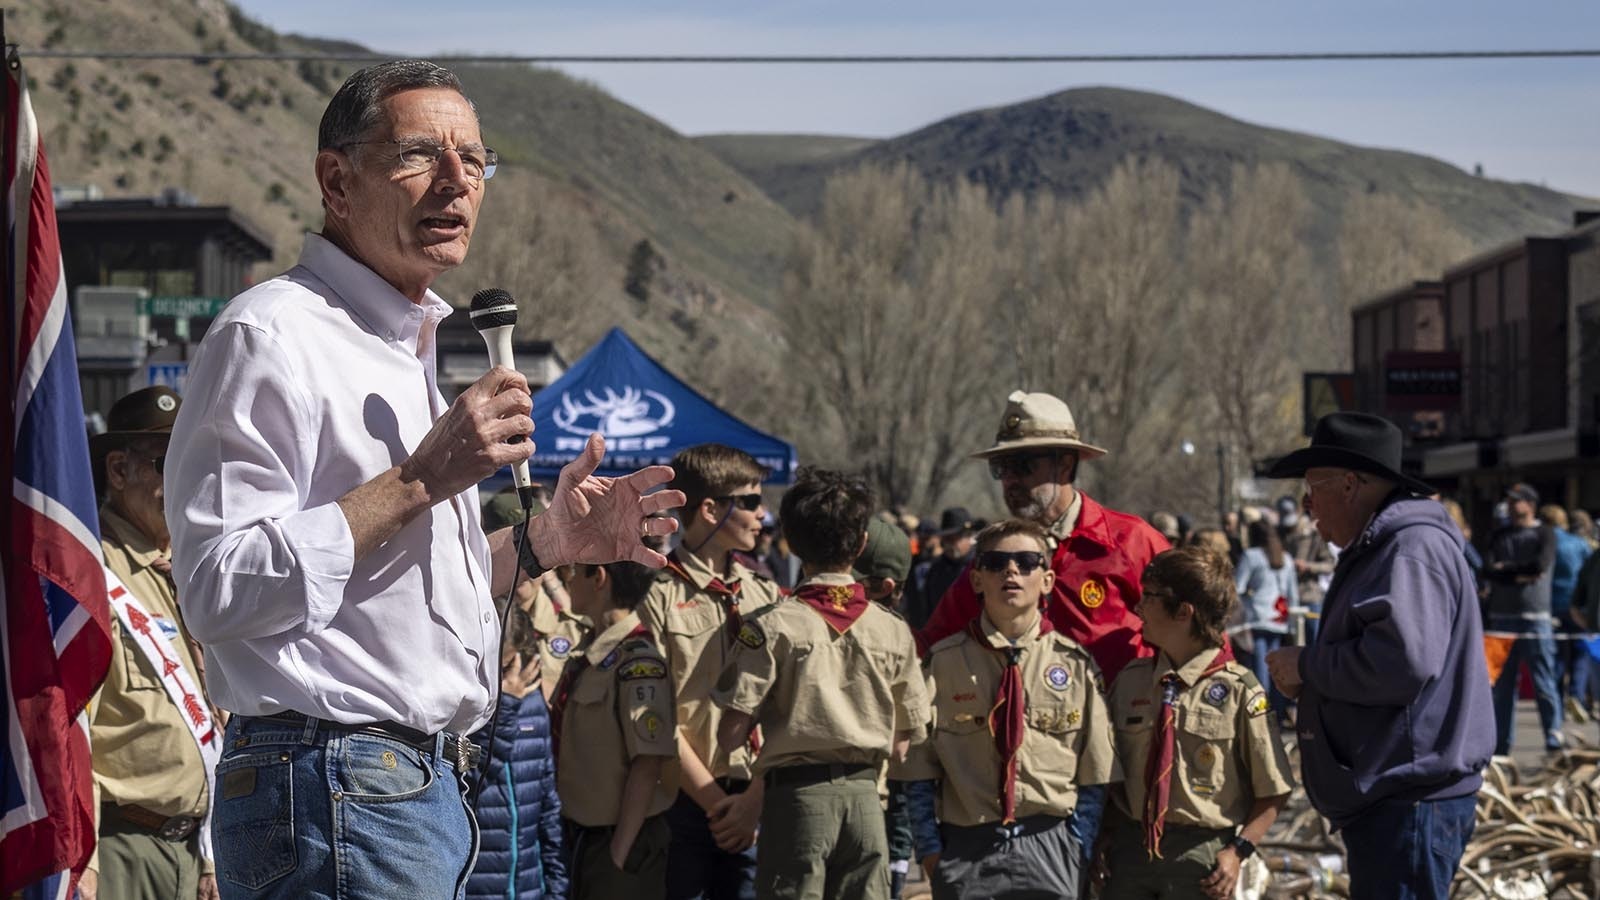 U.S. Sen. John Barrasso, R-Wyoming, remains the most popular U.S. senator for the fifth straight quarter, according to Morning Consult.